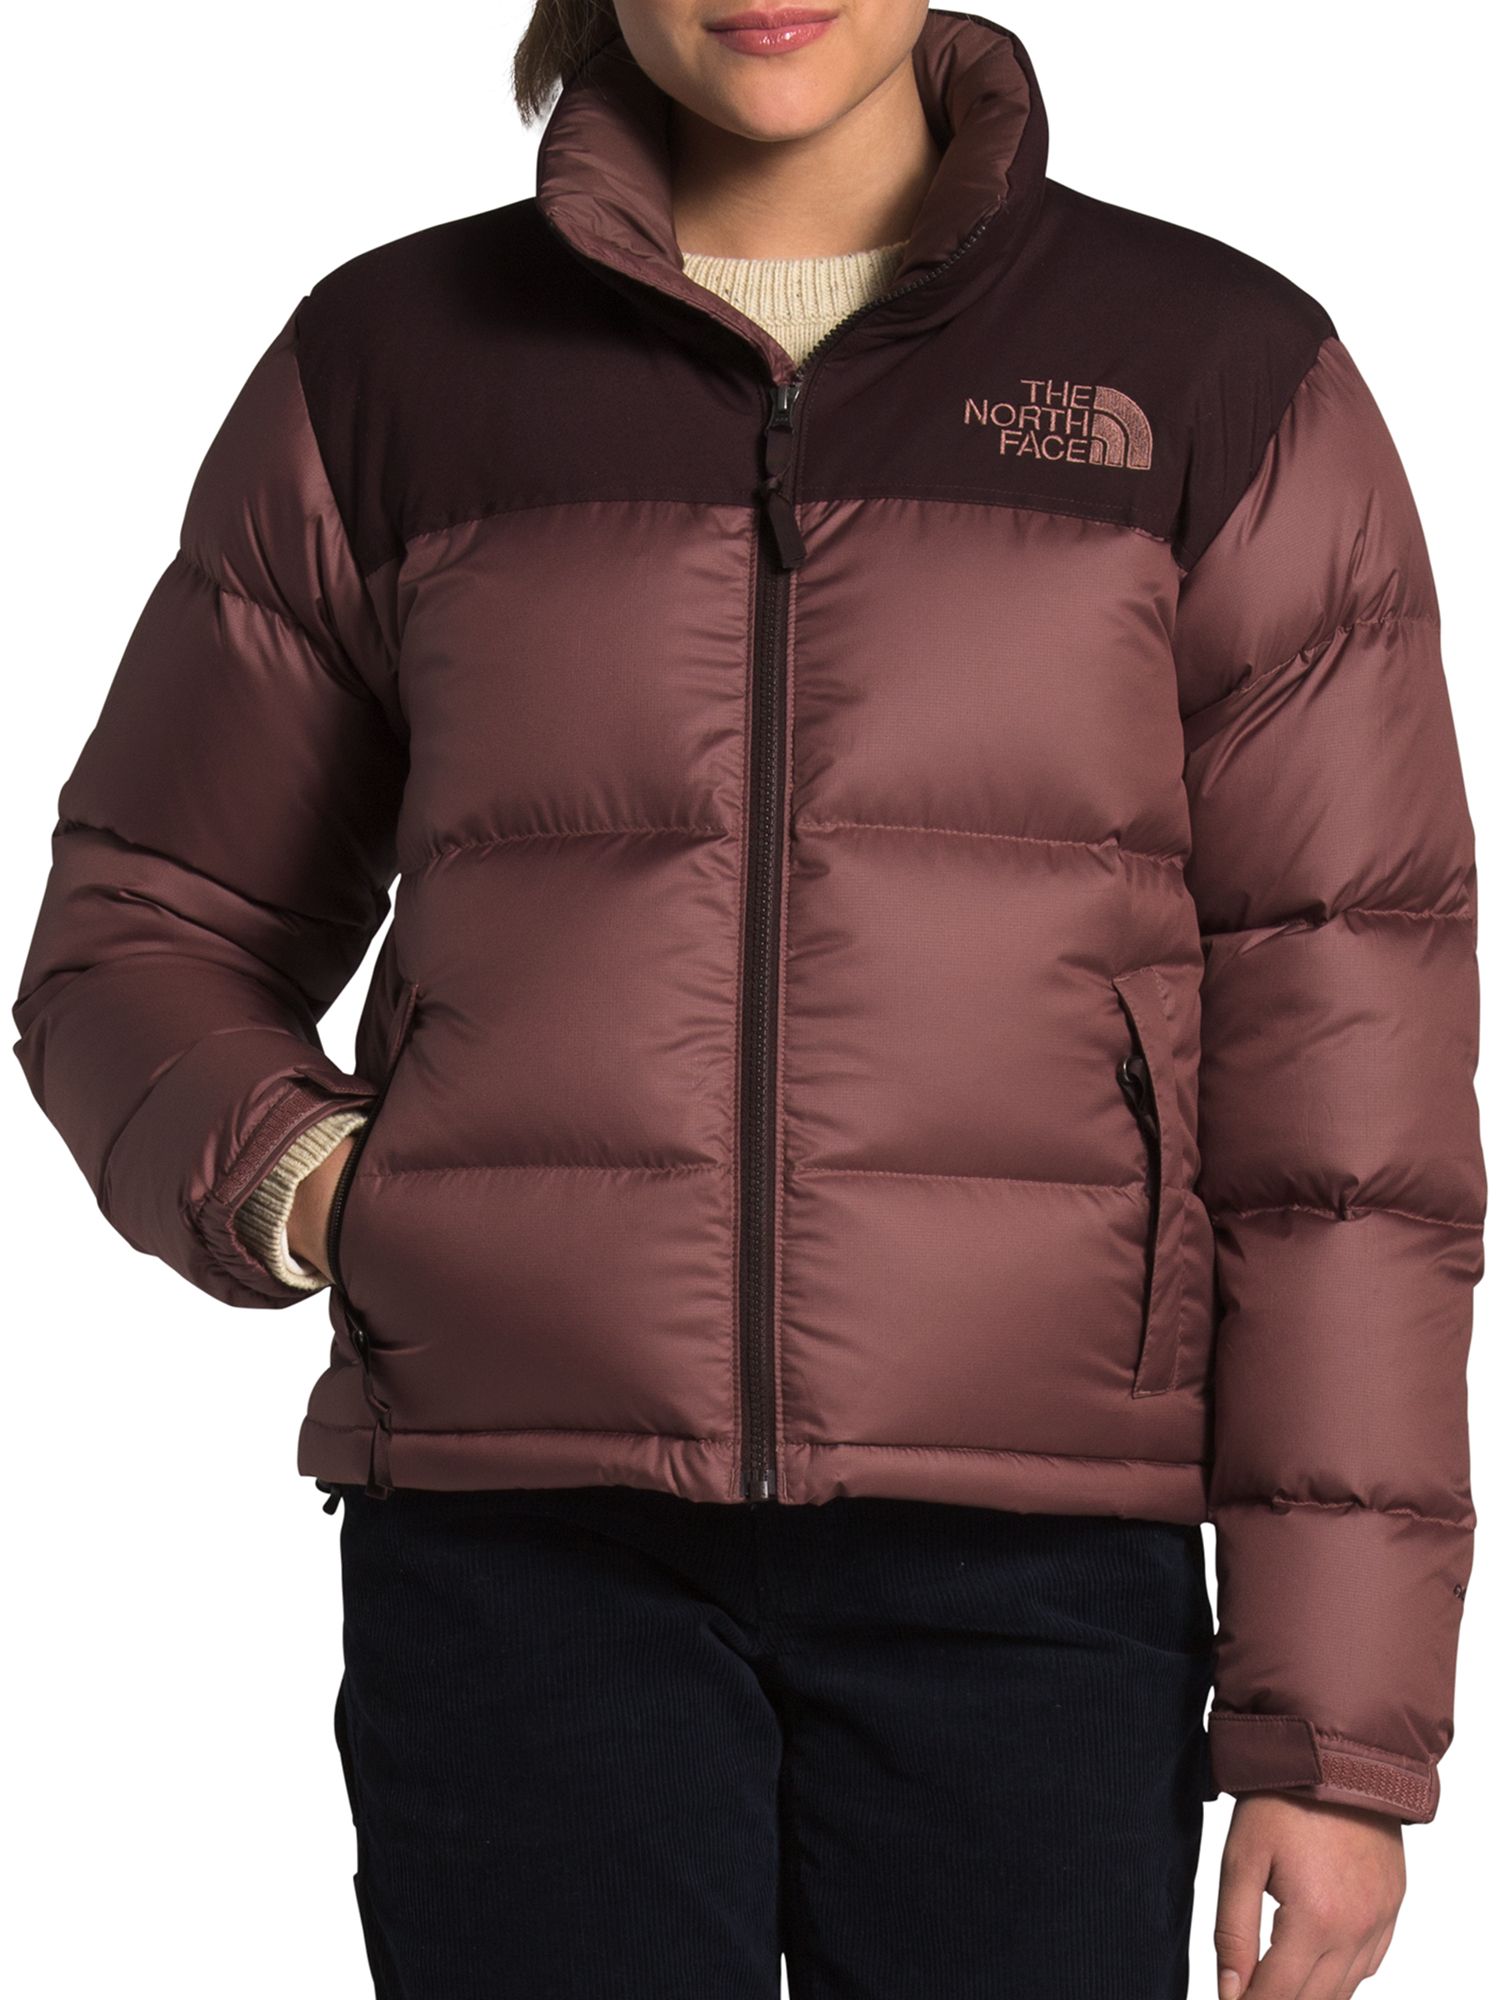 north face brown jacket womens